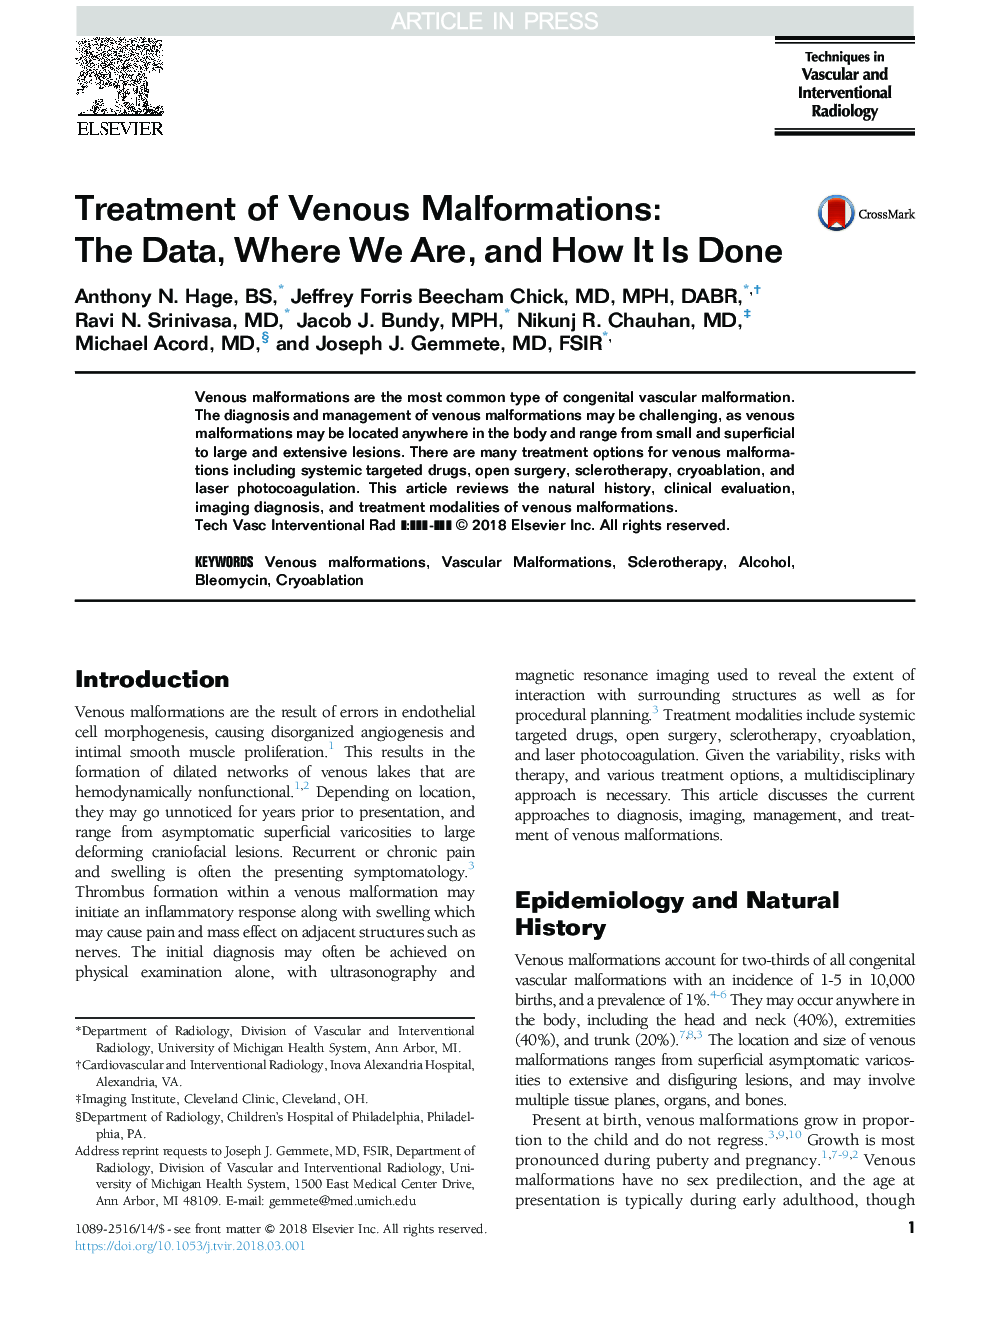 Treatment of Venous Malformations: The Data, Where We Are, and How It Is Done